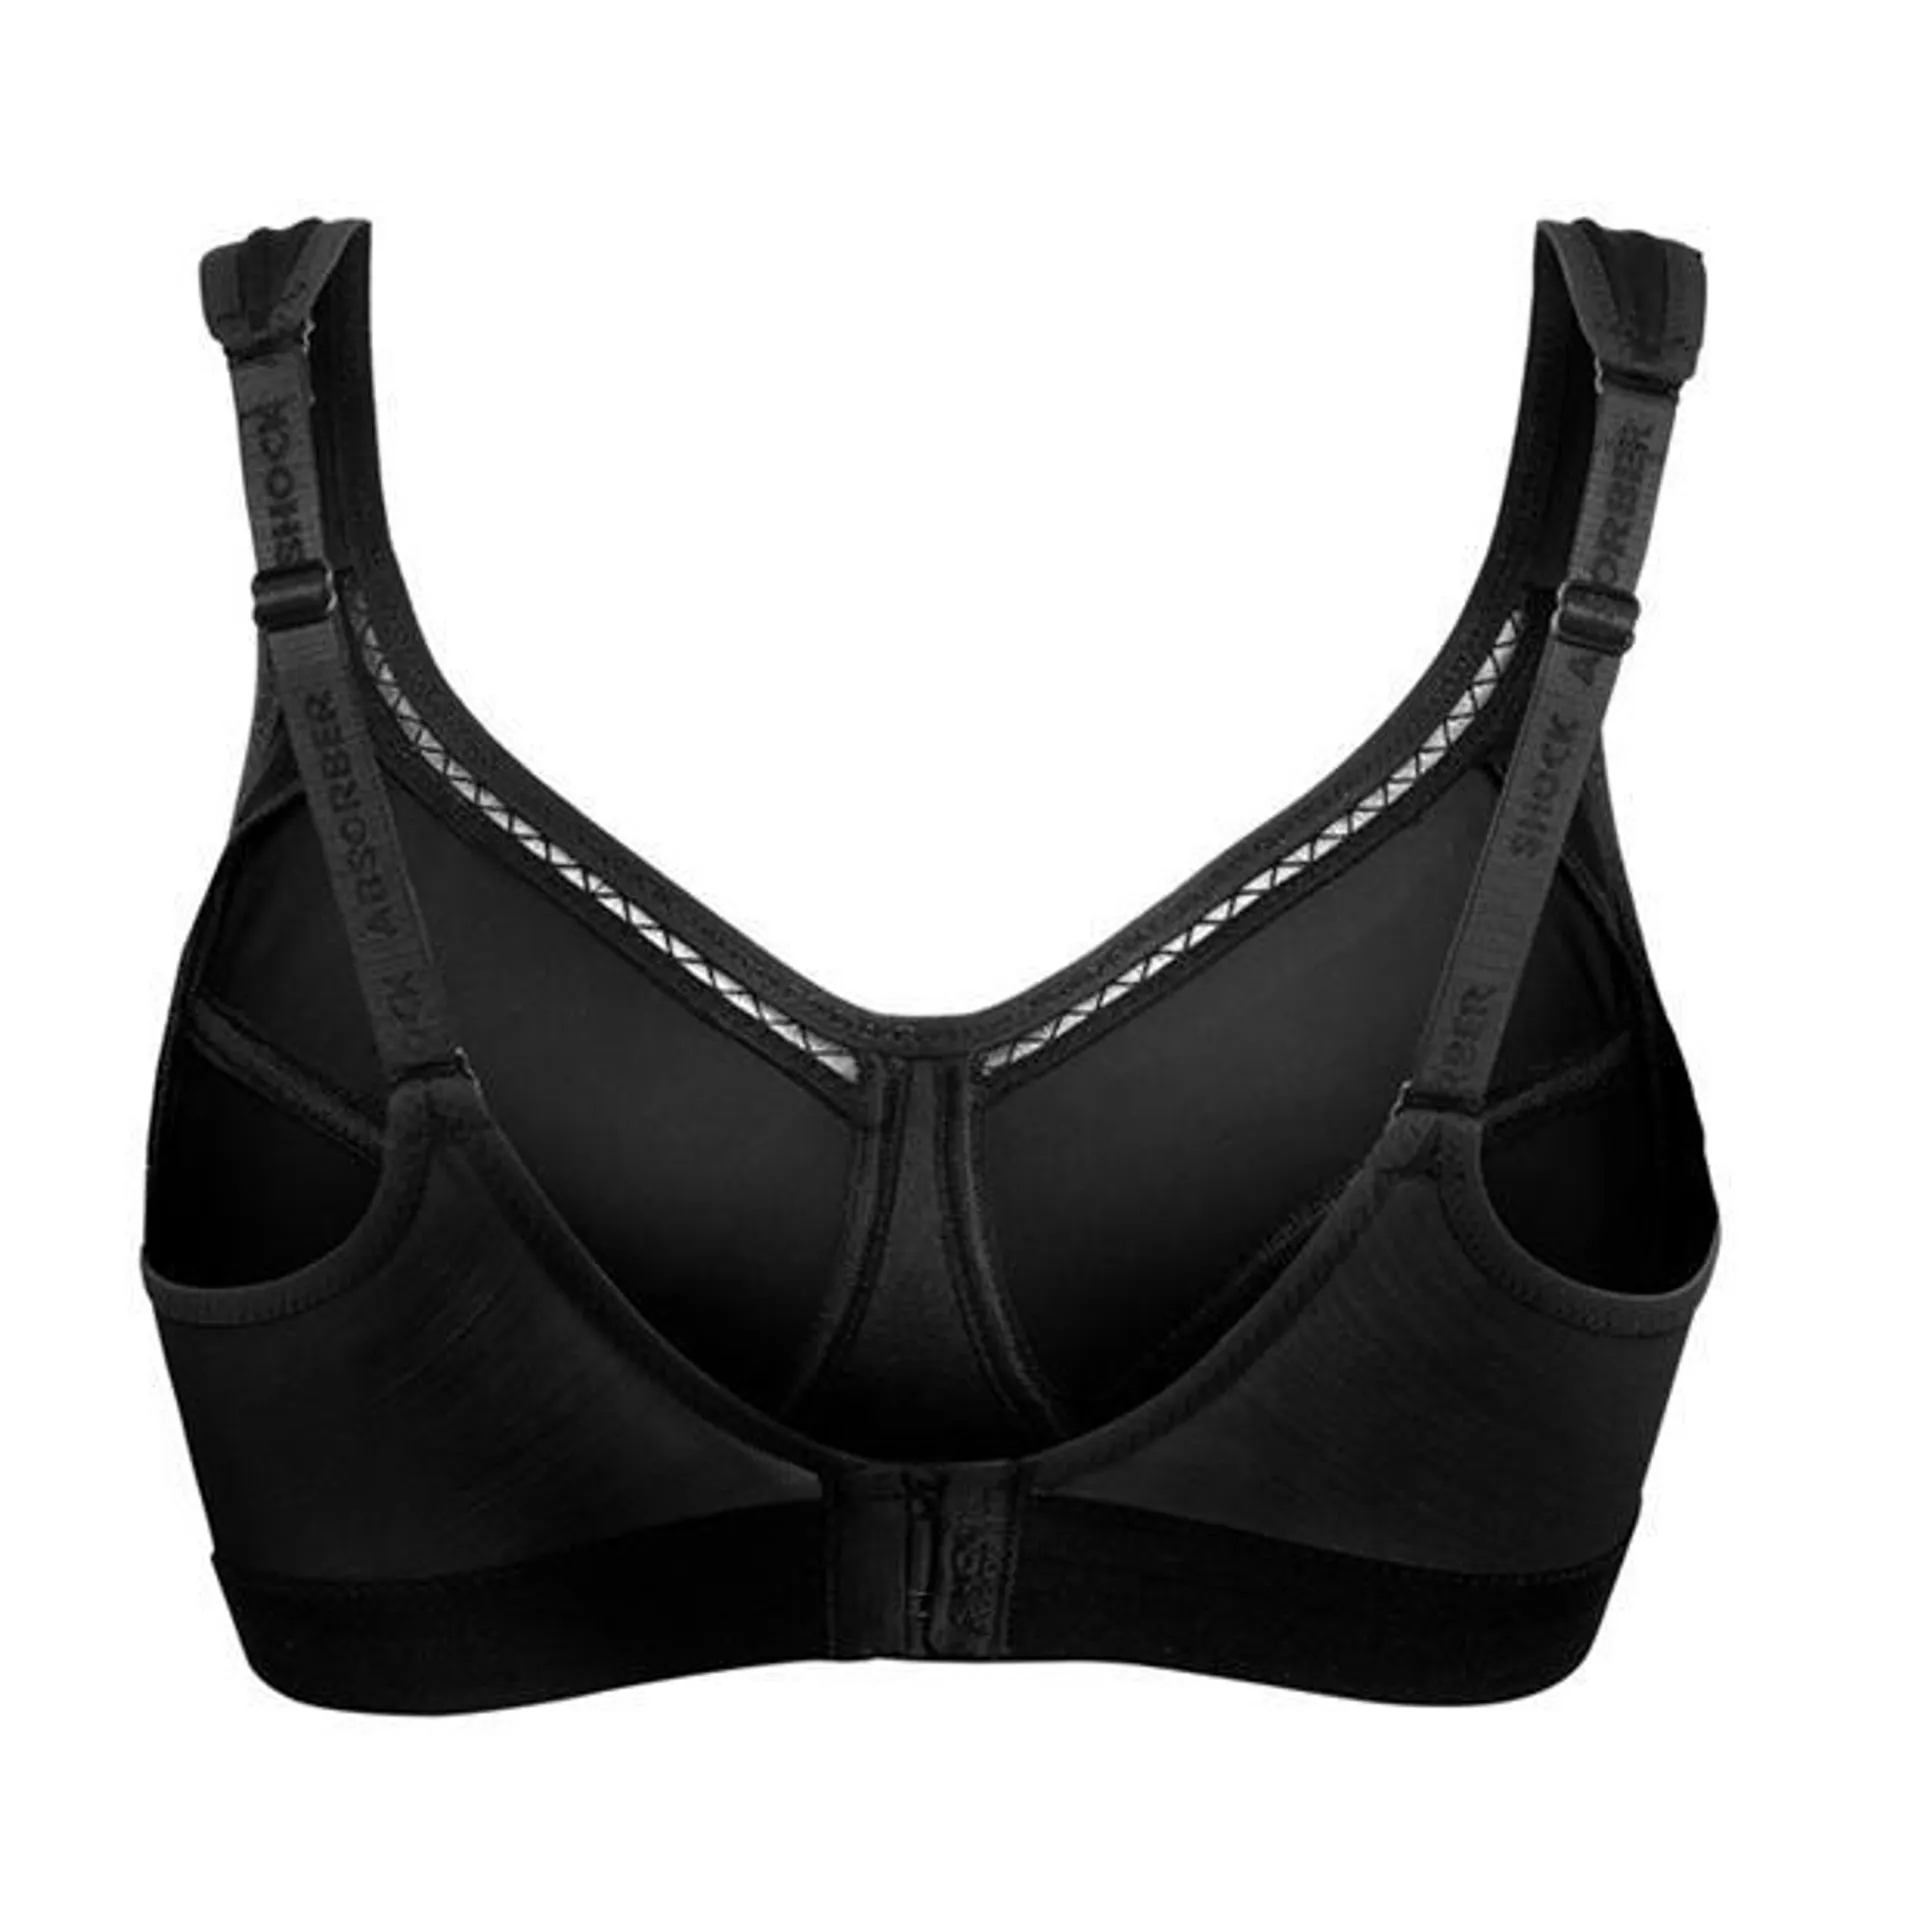 Absorber Active Classic Support Bra